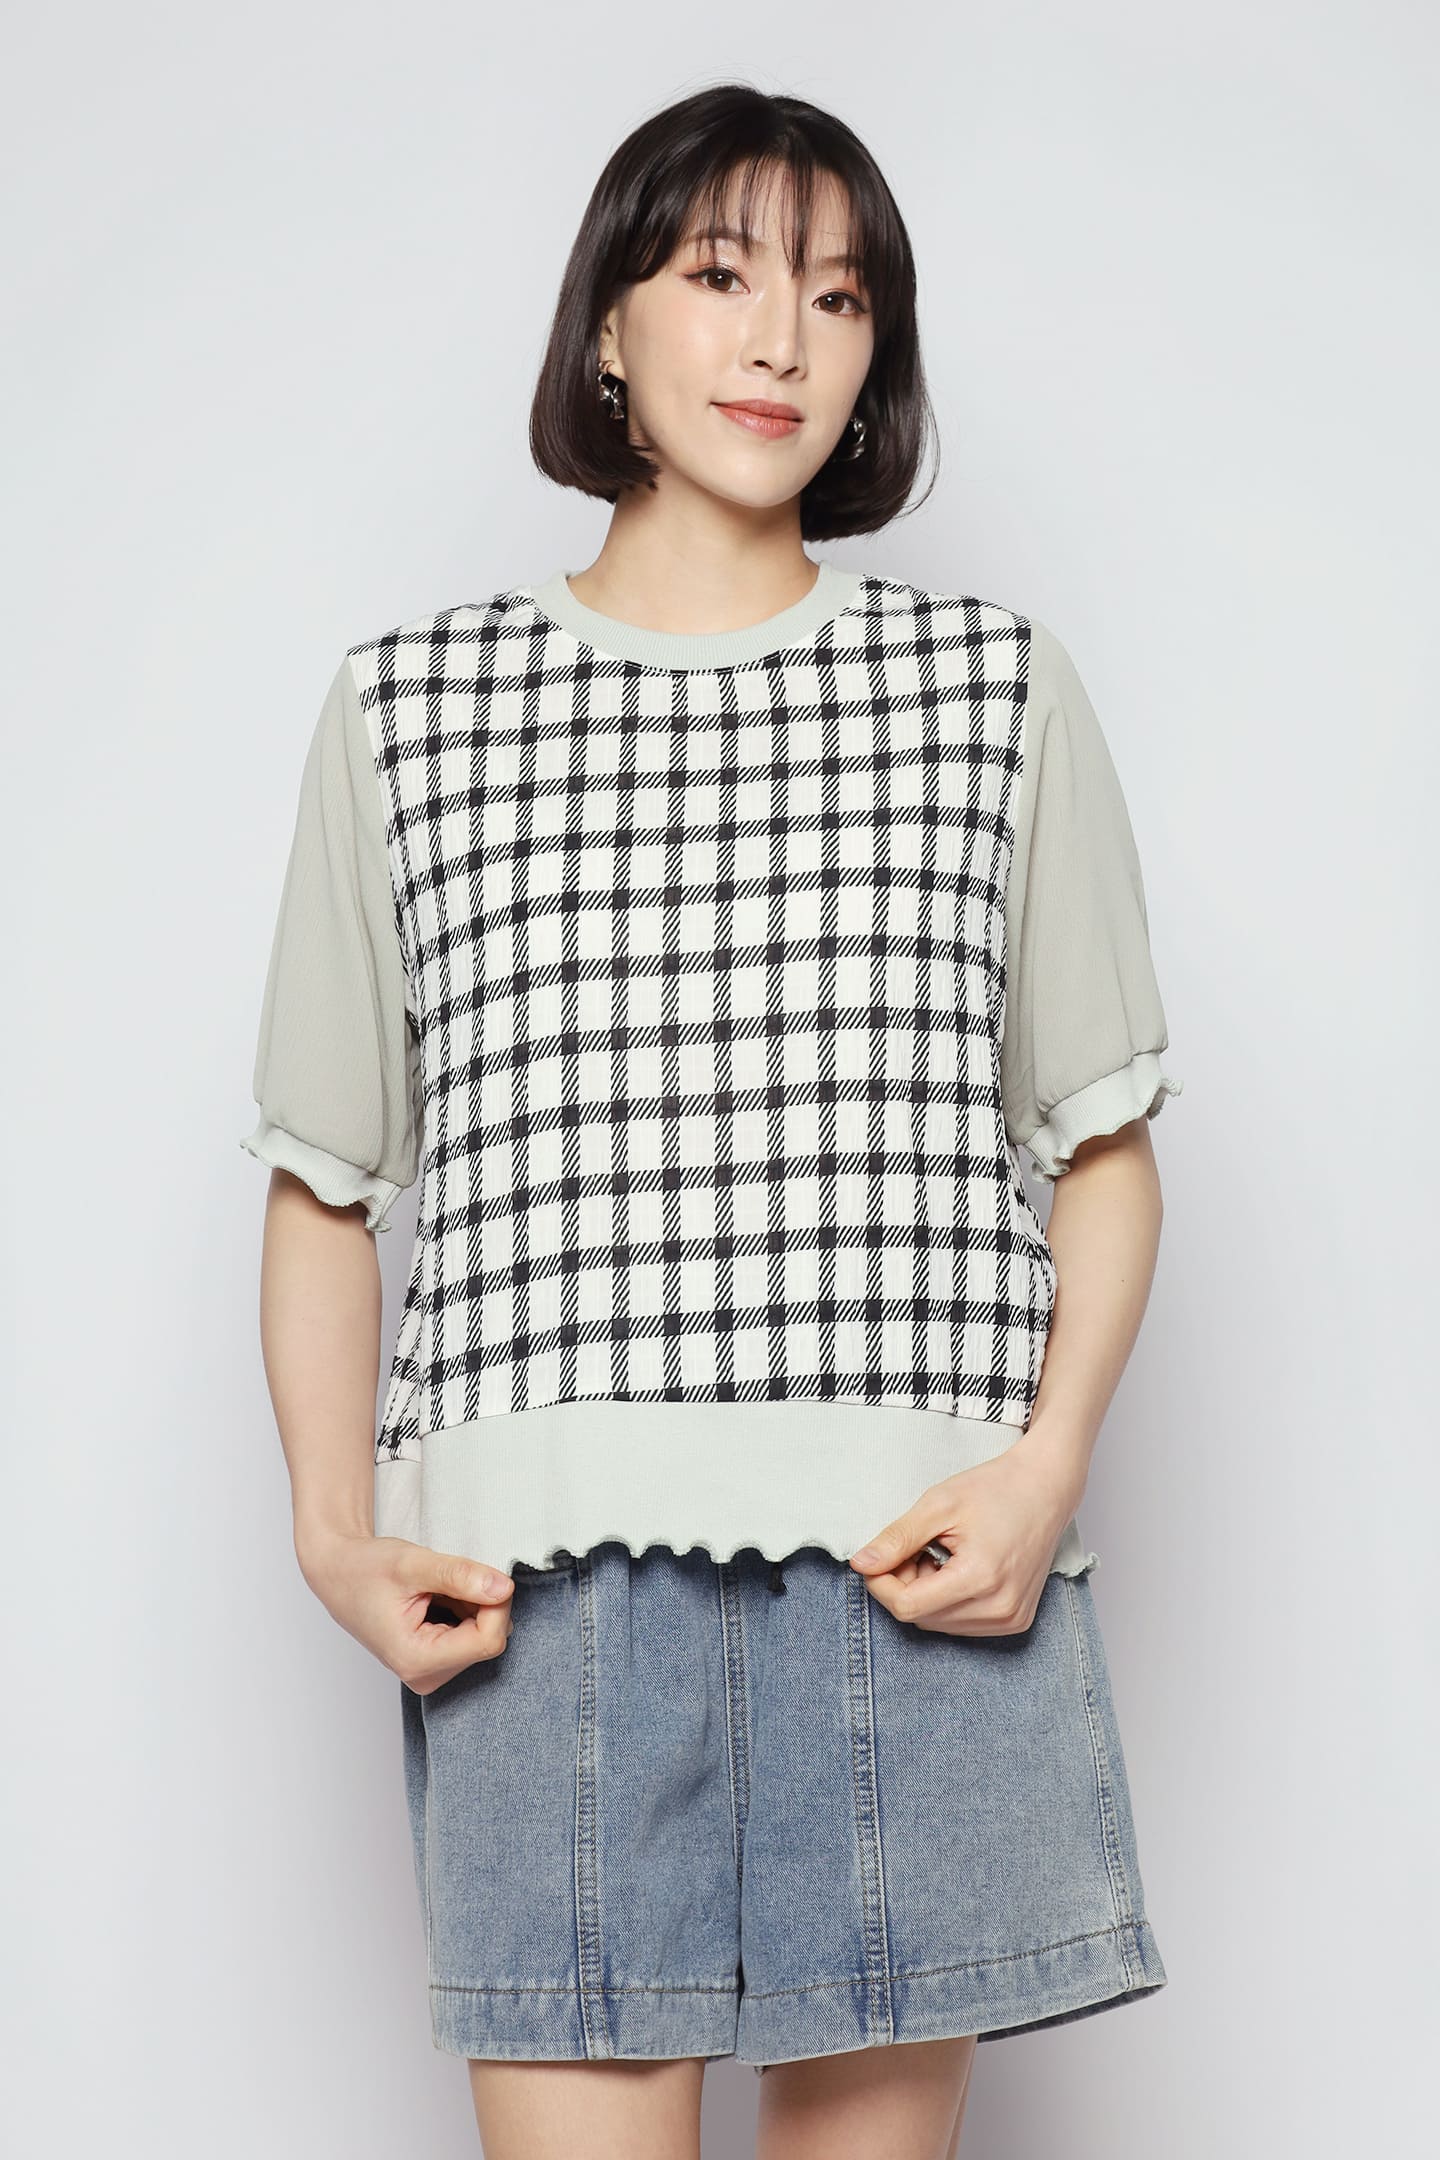 Mildred Checkered Top in Mint Green